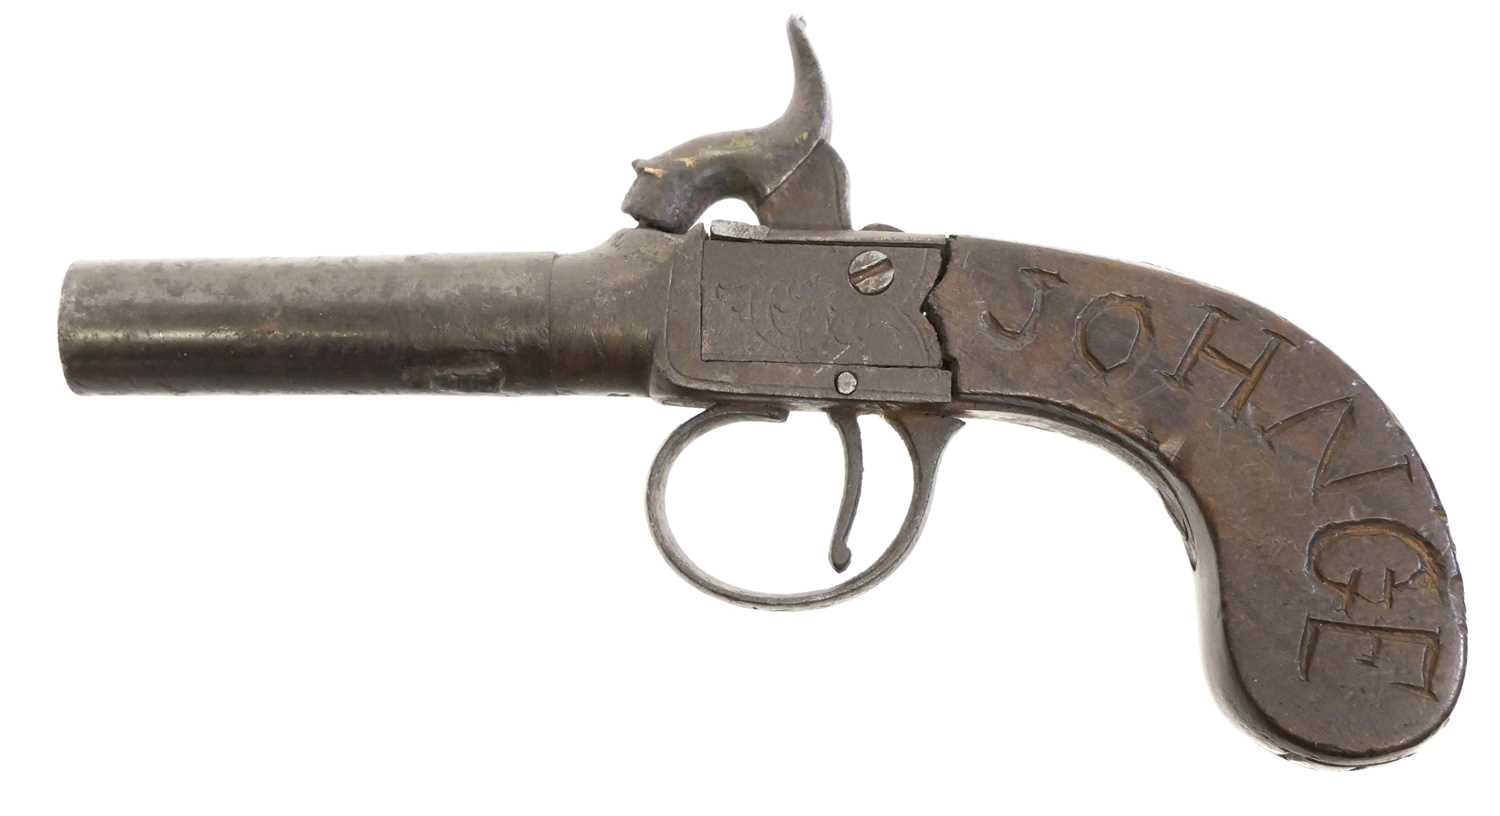 Percussion 70 bore pistol, 2.25inch barrel, box lock action engraved with scrollwork, the stock